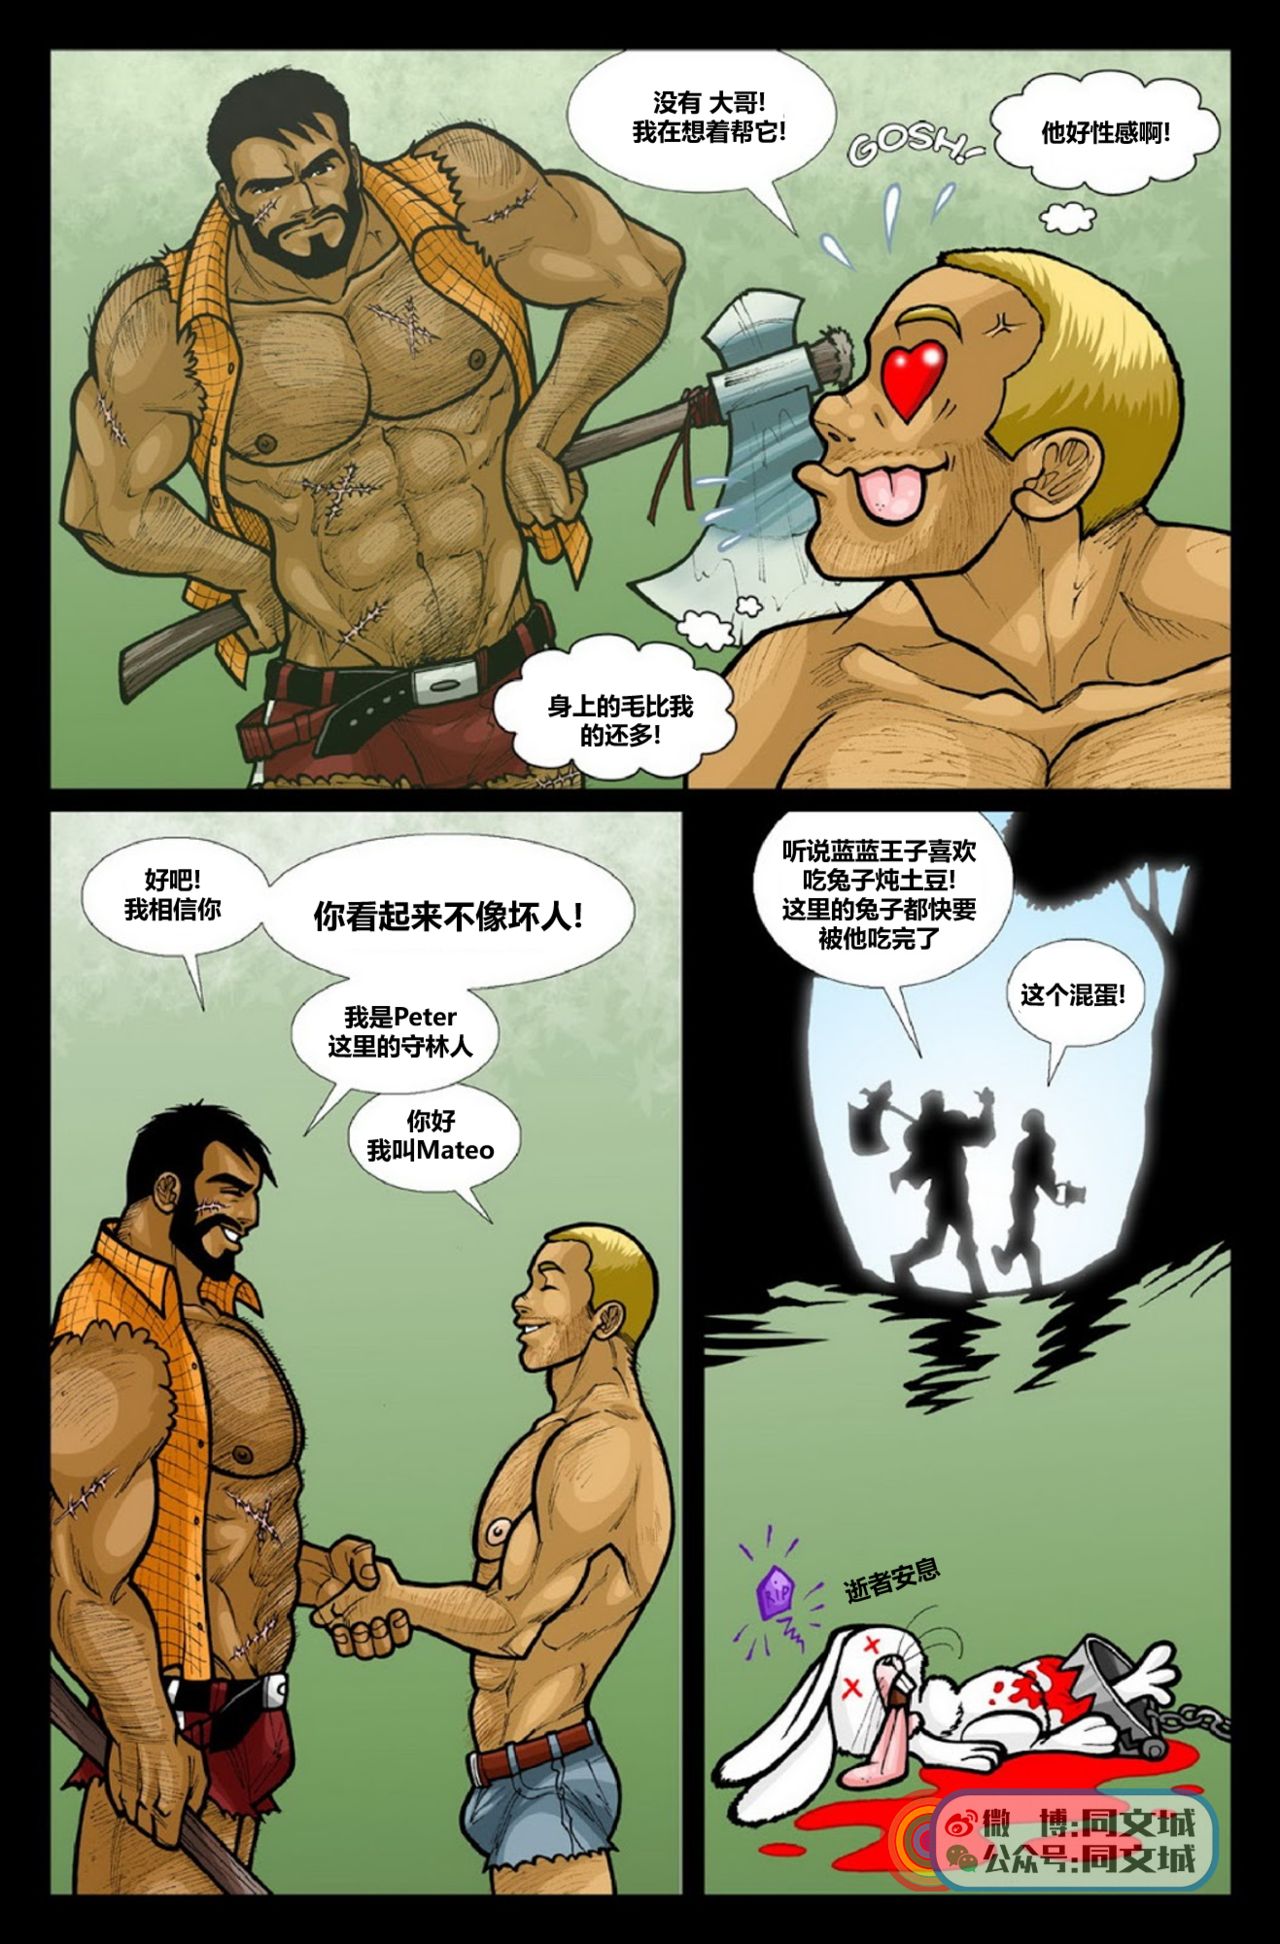 David Cantero _Sleeping Bear A Gay Tale（Chinese） page 14 full